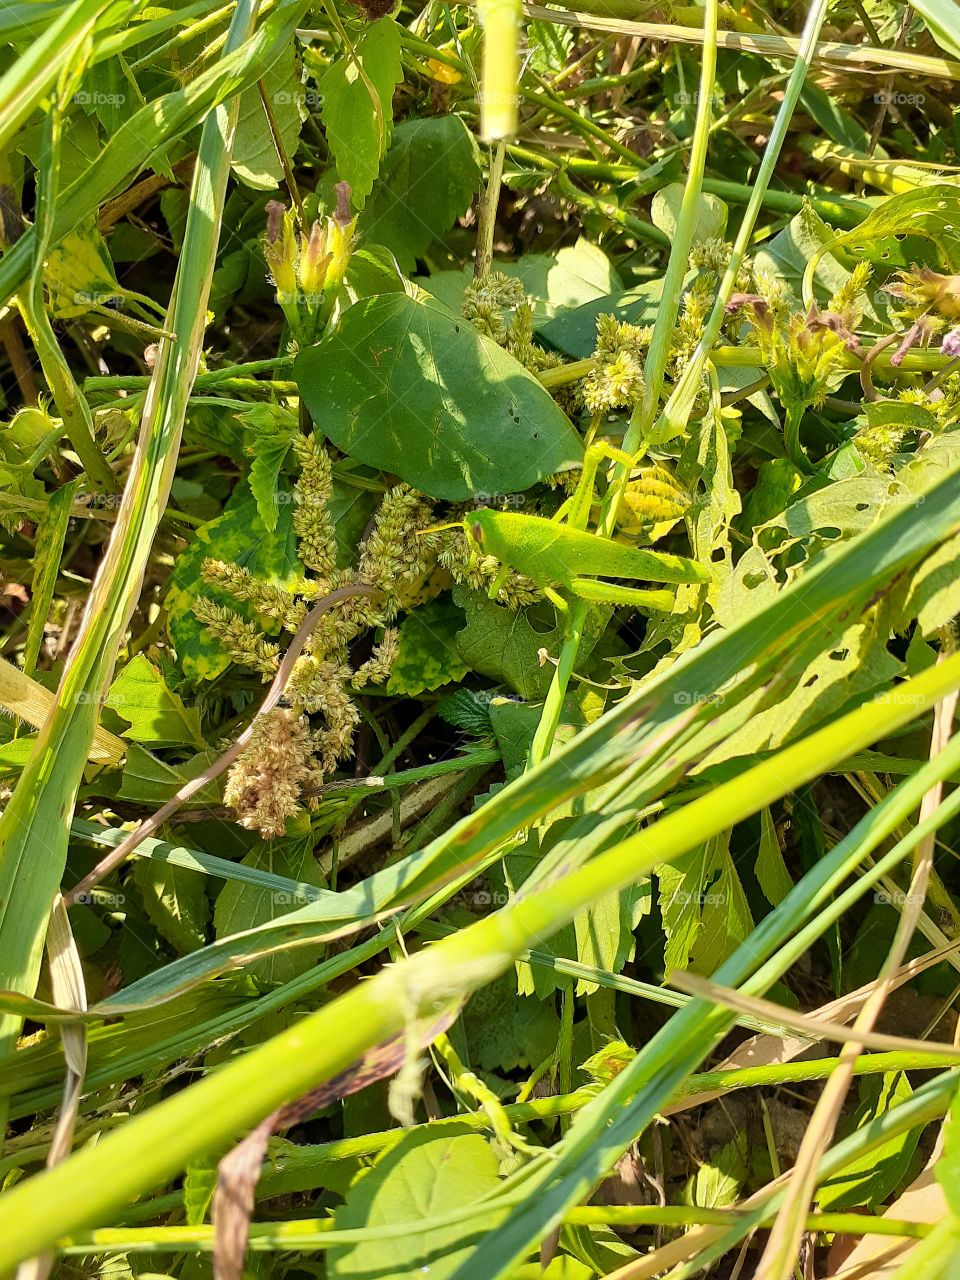 Just at the center of the photo you can see a green grasshopper eating a kind of seeds or grass flowers.